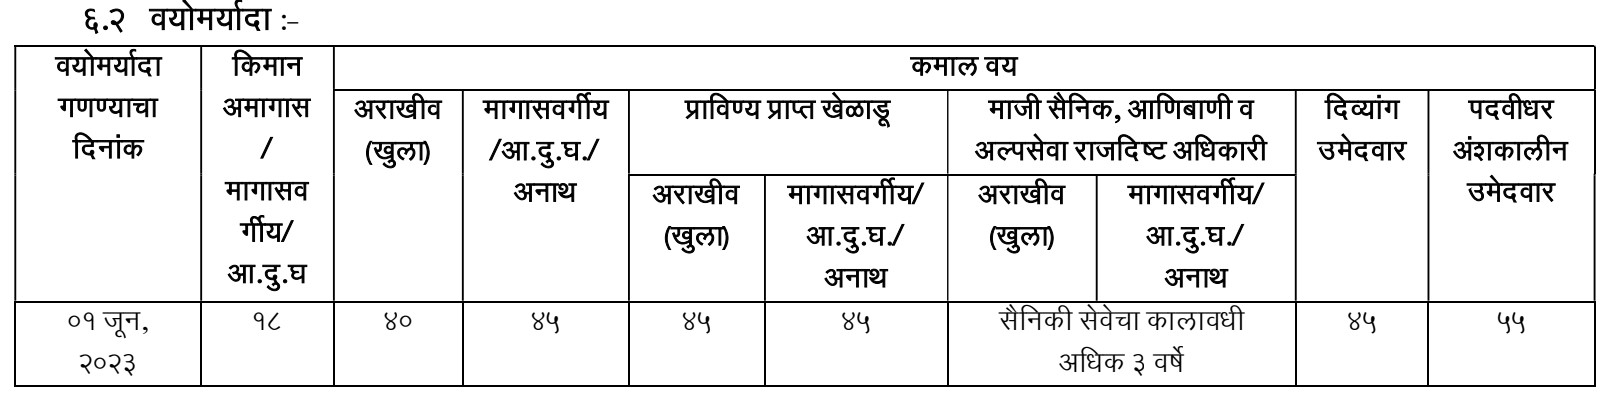 Directorate of Sports and Youth Services Recruitment 2023